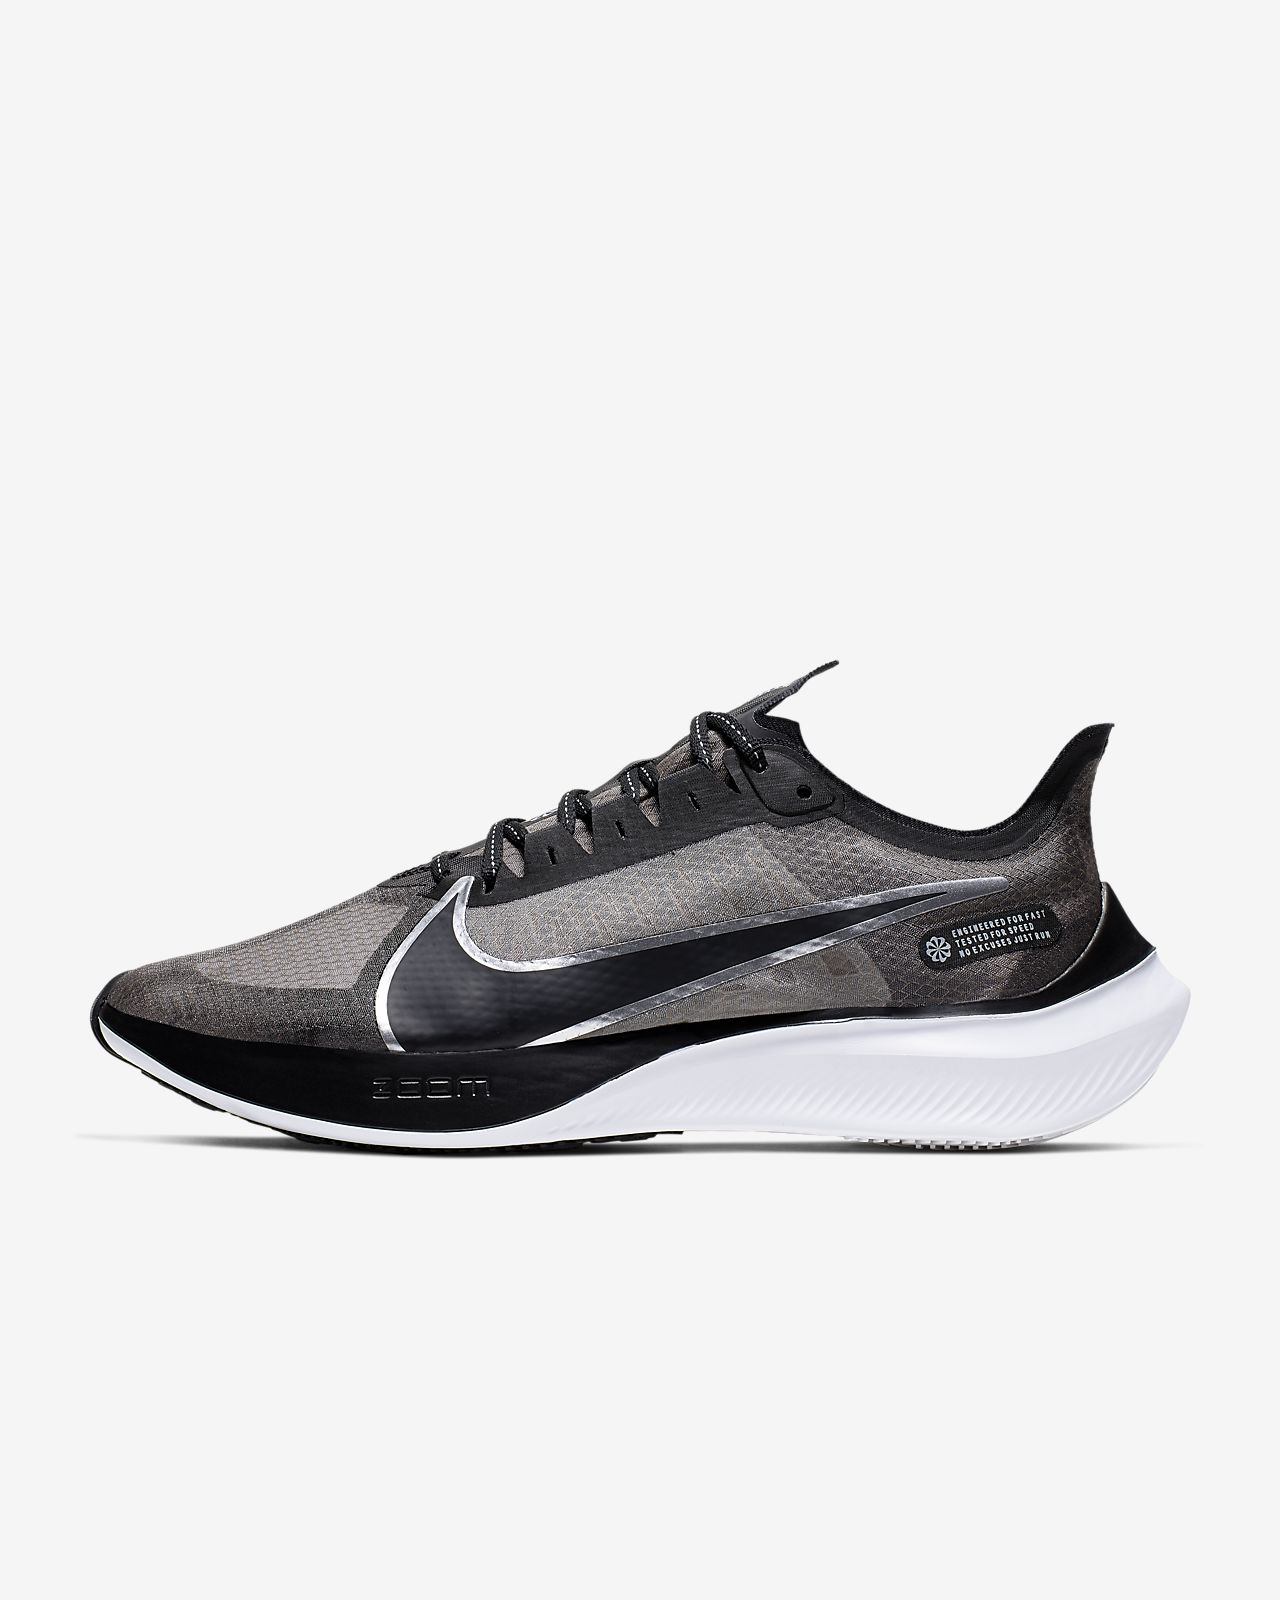 nike men's zoom gravity running shoes review